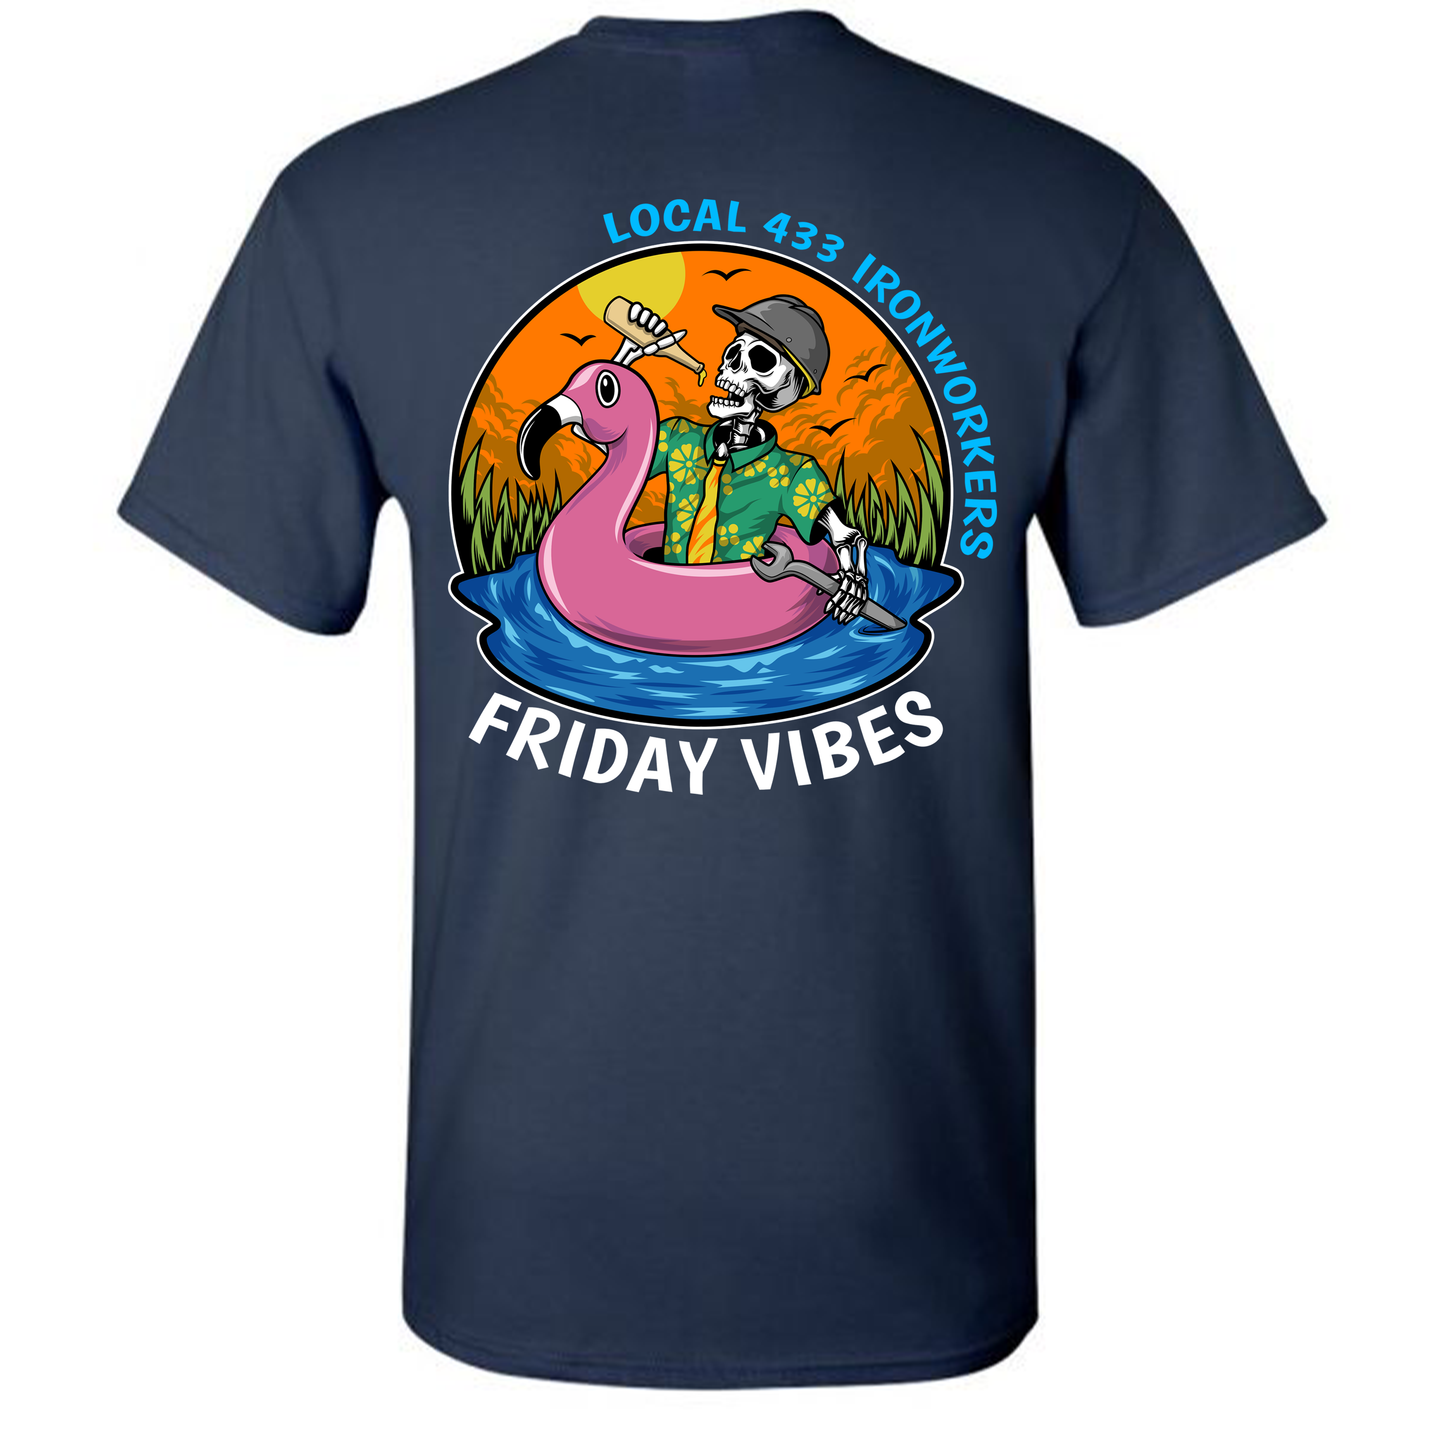 FRIDAY VIBES LOCAL 433 T-SHIRT